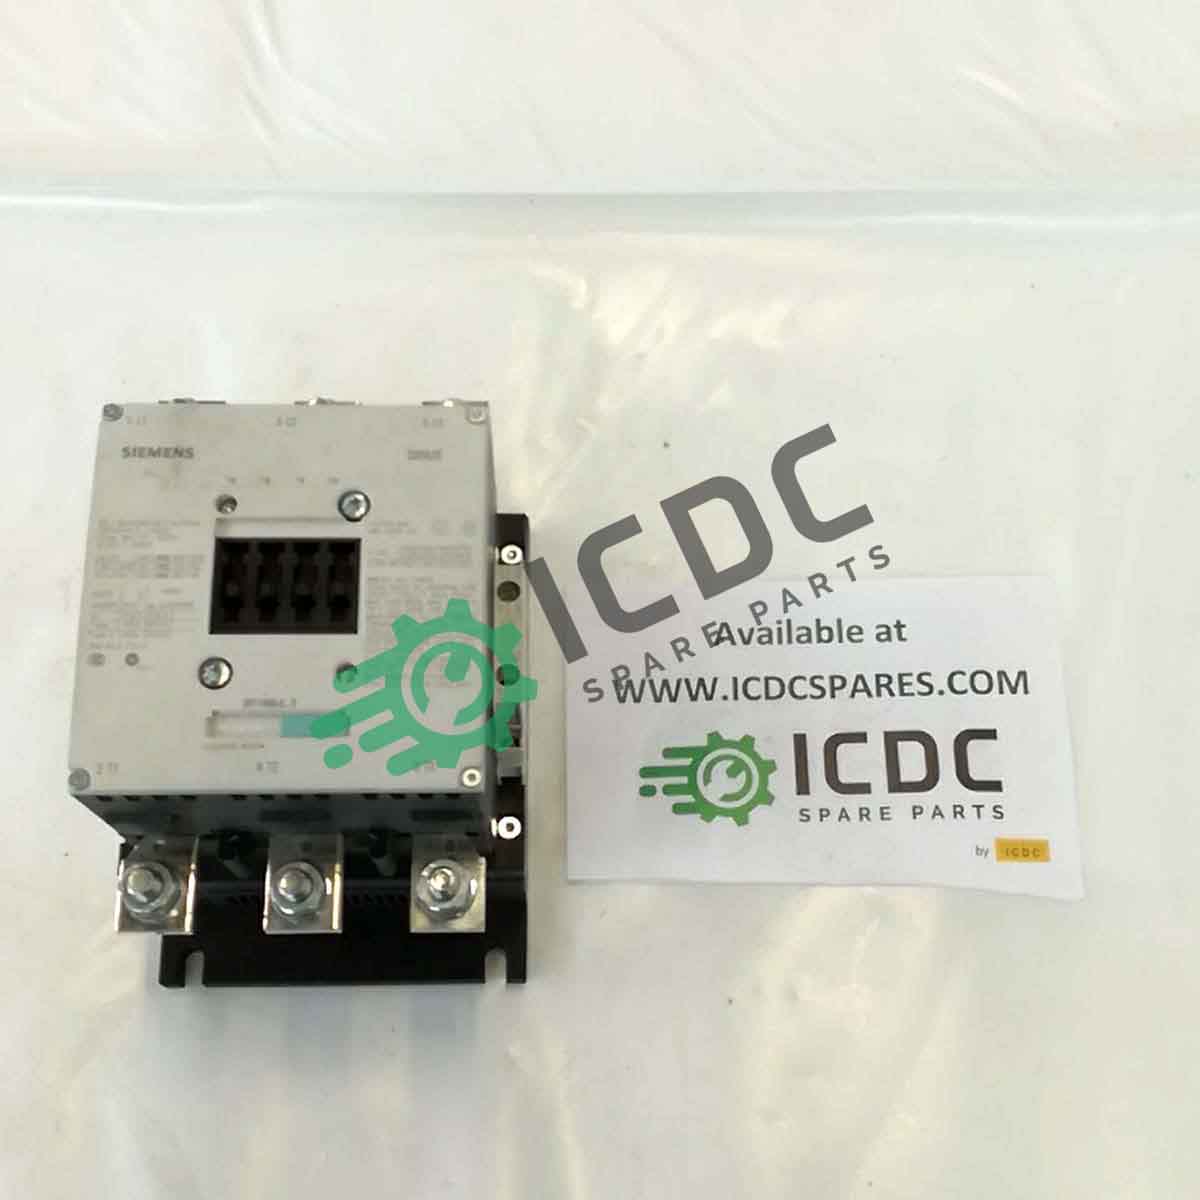 SIEMENS 3RT1066-6AB36 Connector Call ICDC for Tech Specs!